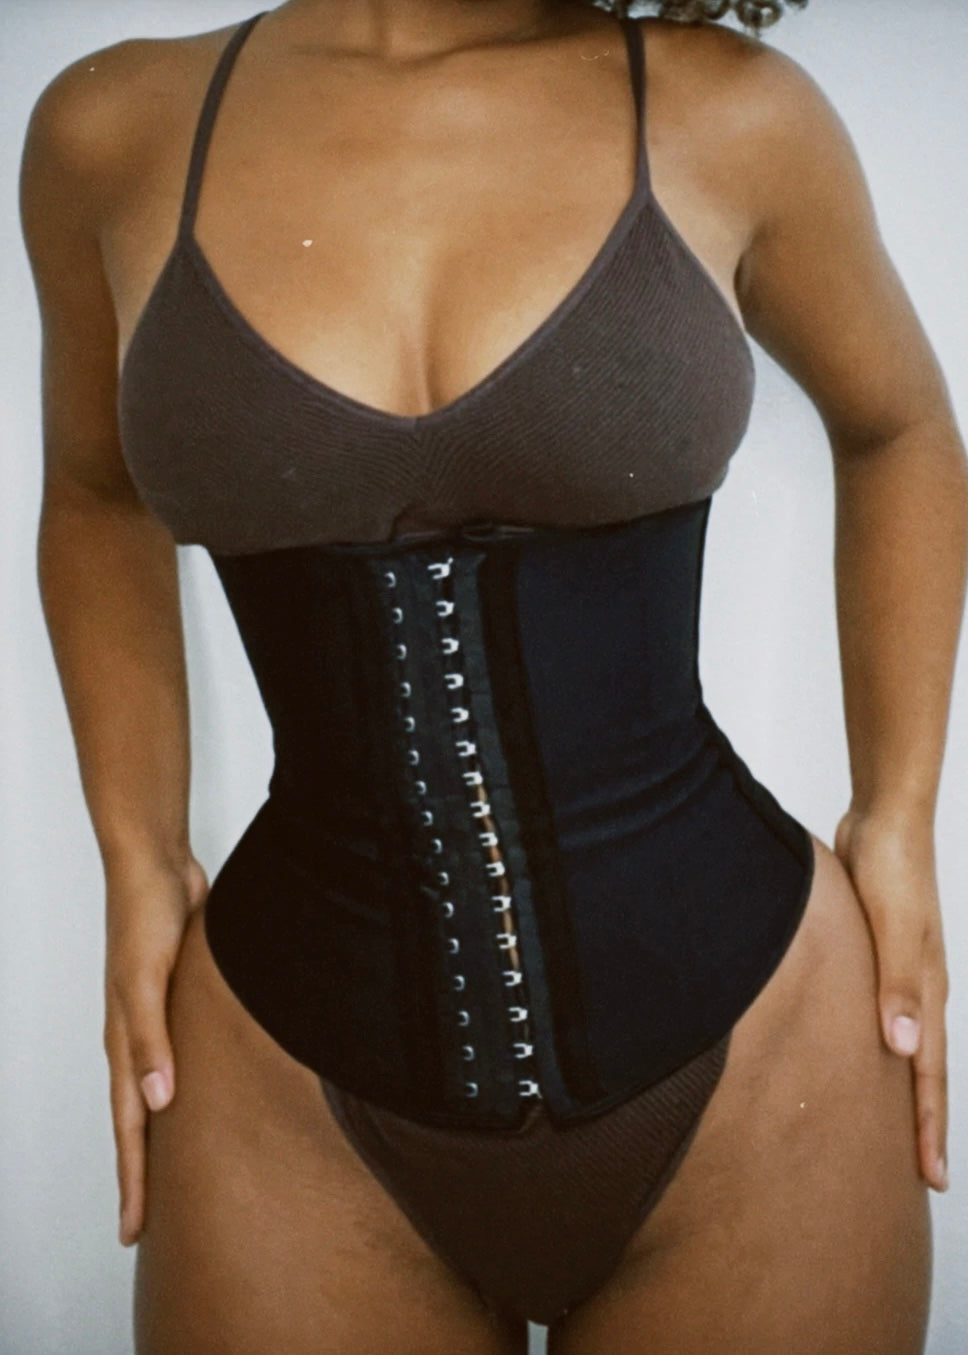 Waist Trainers for sale in Oklahoma City, Oklahoma, Facebook Marketplace